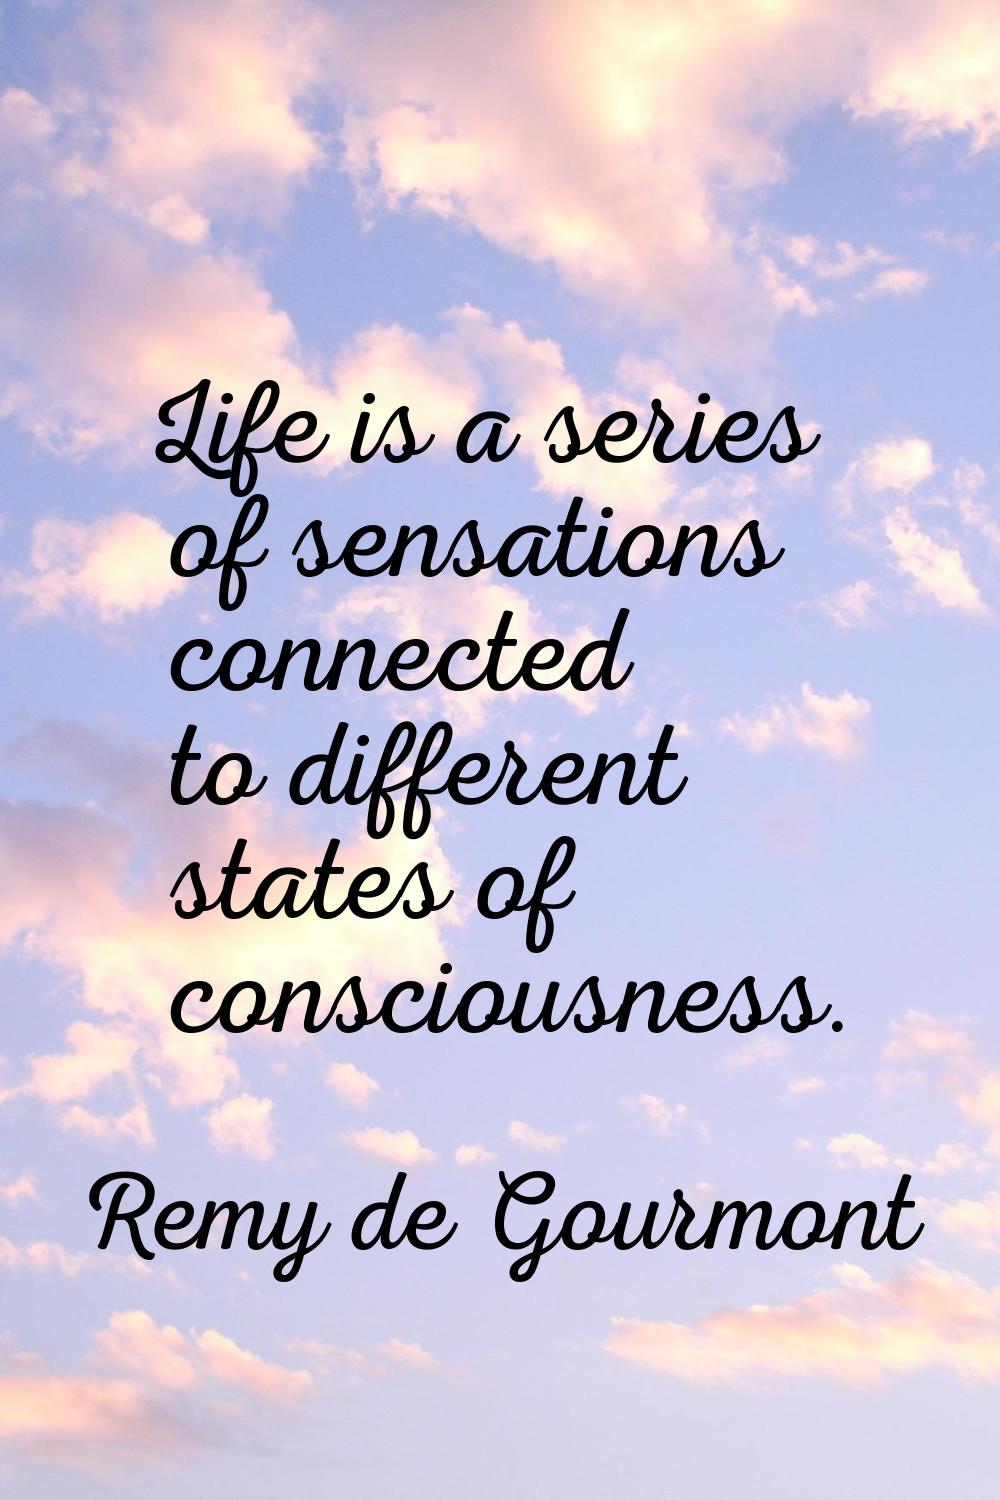 Life is a series of sensations connected to different states of consciousness.